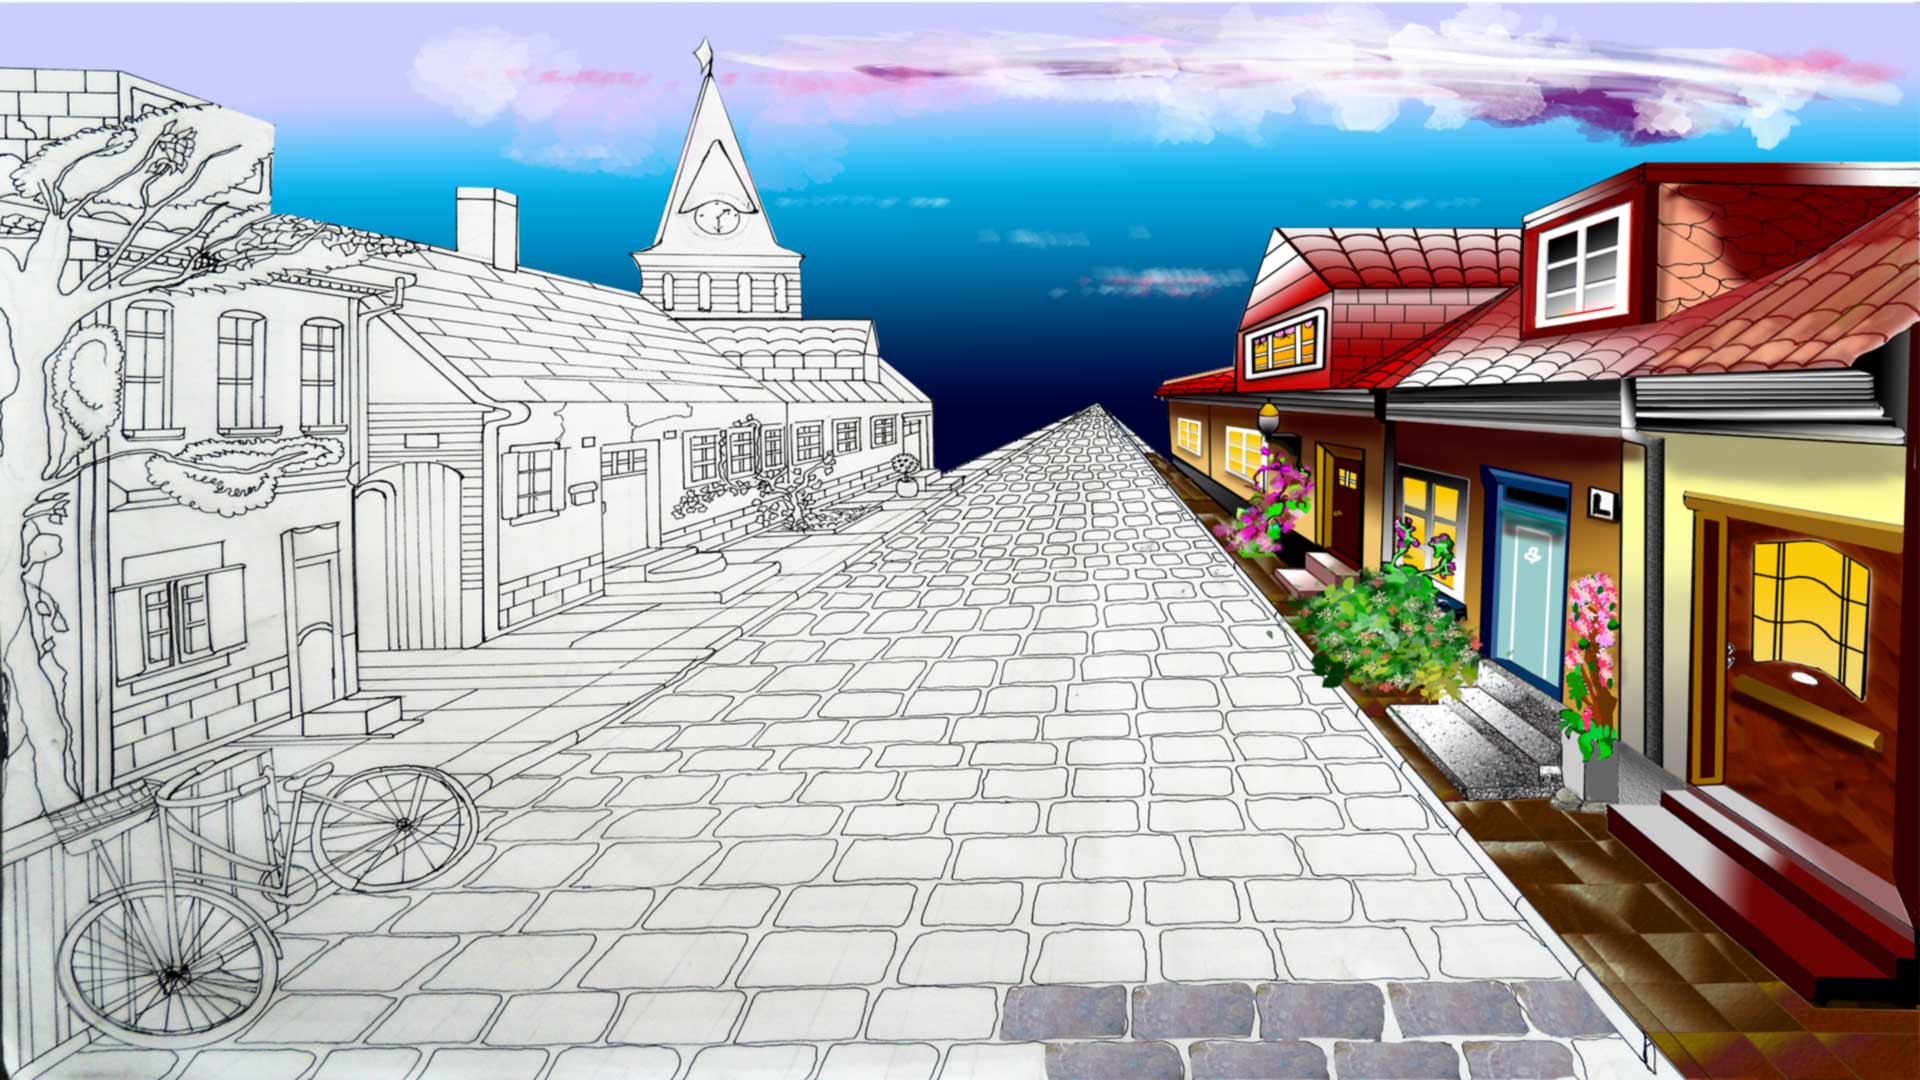 One view perspective of a street scene that was first hand drawn and then edited in photoshop and Illustrator